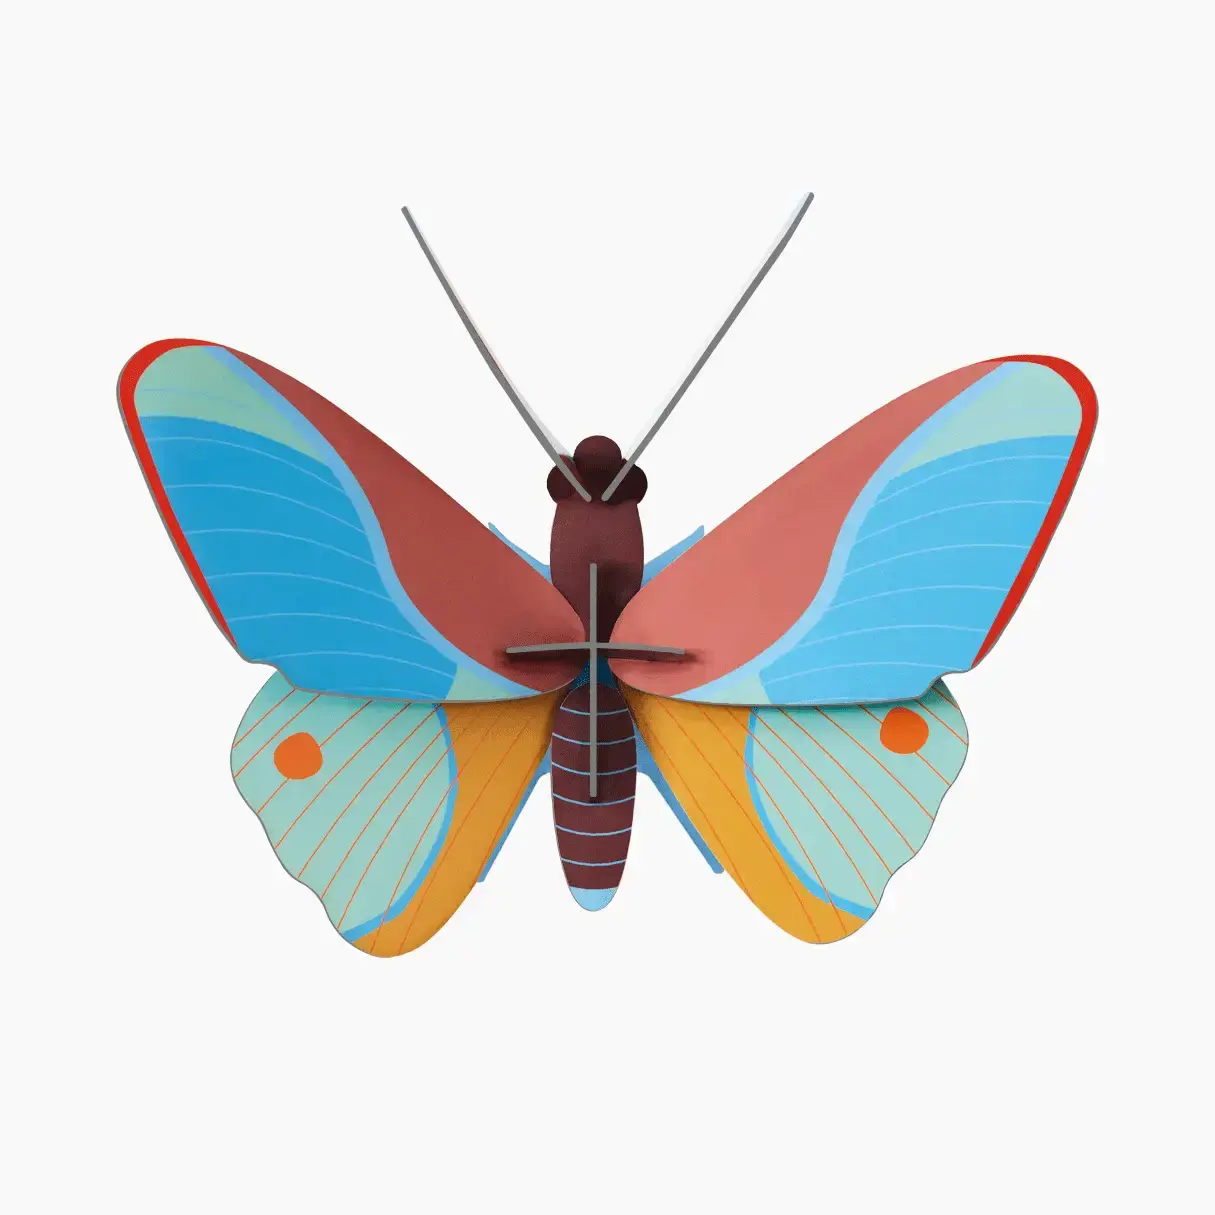 https://cdn.shoplightspeed.com/shops/626275/files/56170396/studio-roof-3d-insect-puzzle-small-butterfly.jpg